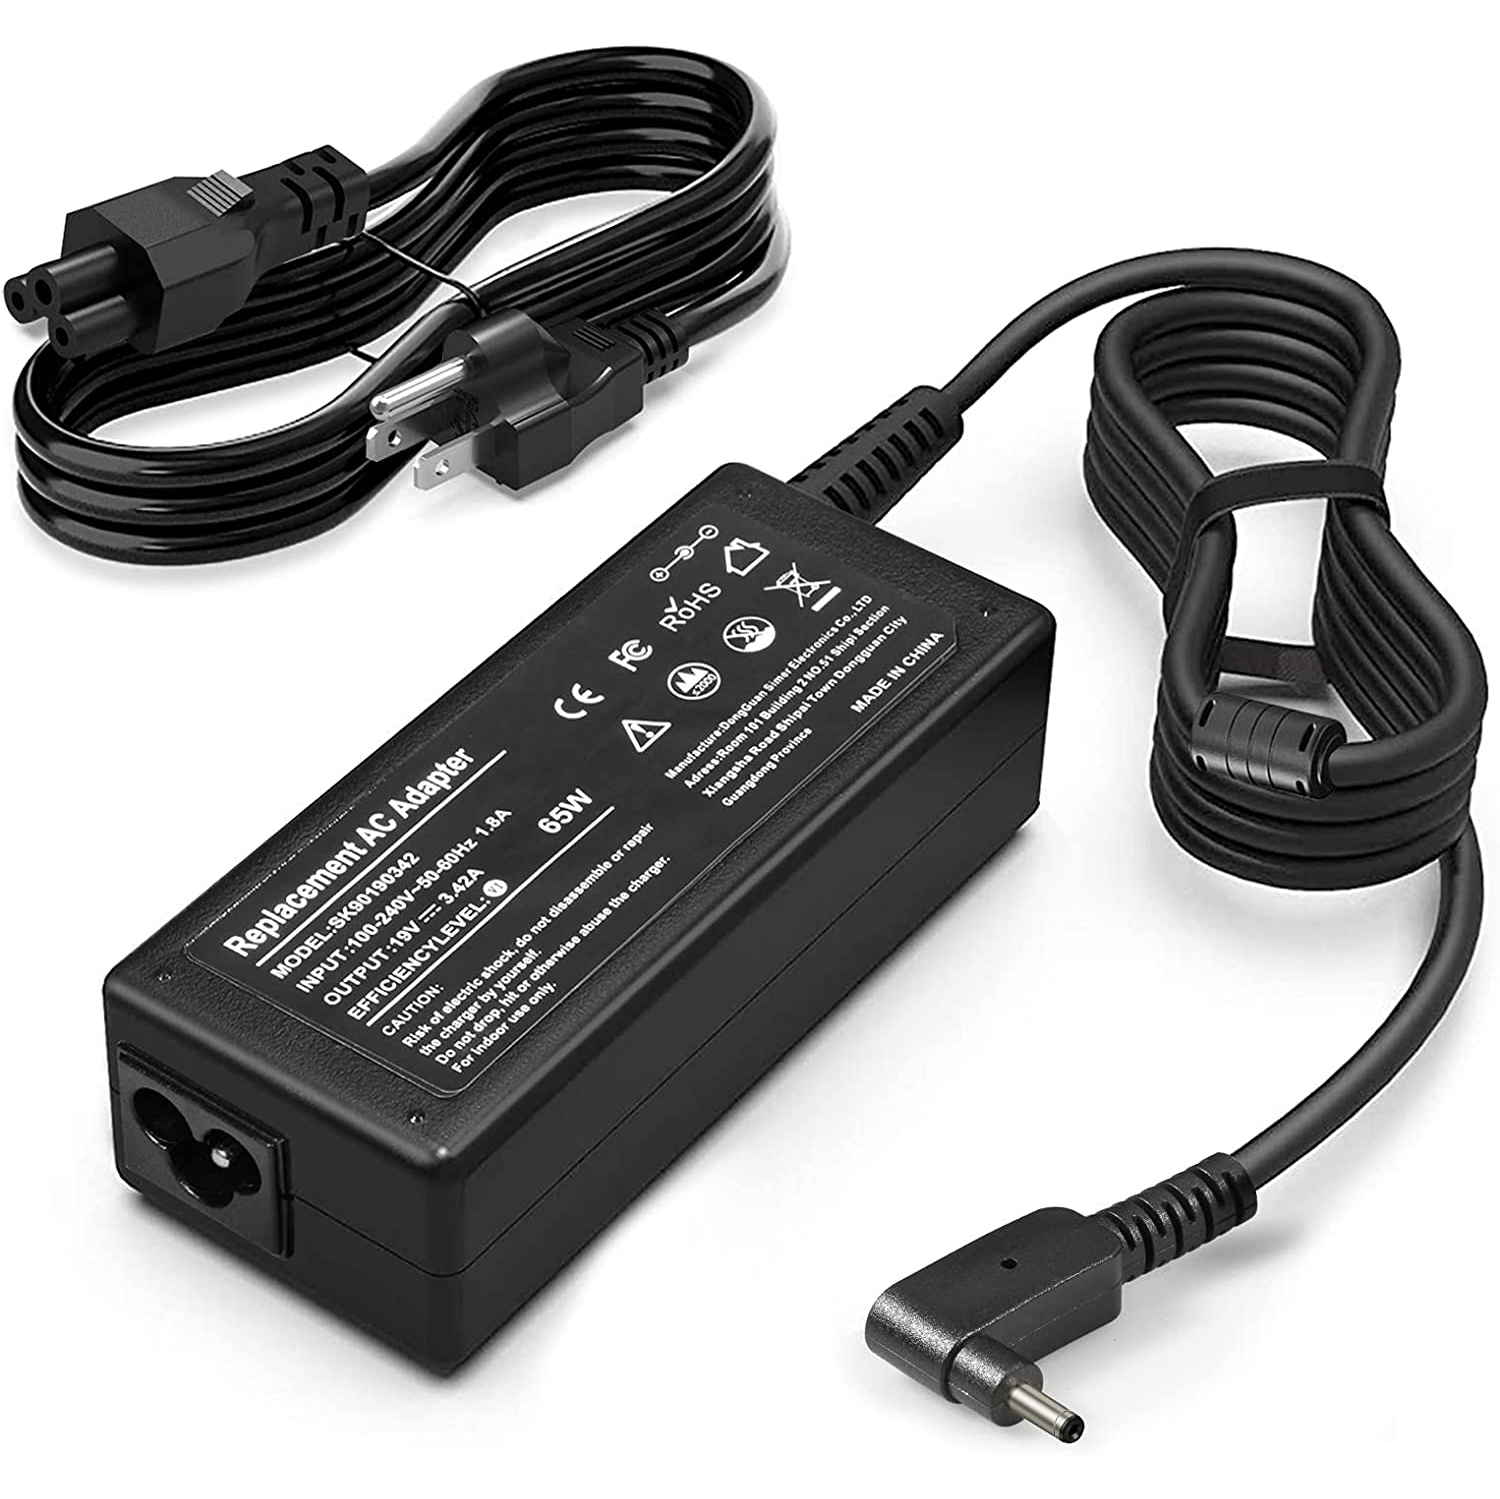 45W 65W AC Adapter Charger for Acer Swift 3 SF314 SF314-52 N16P1 N17W2 N19H1 Acer Chromebook 11 13 14 15 R11 CB3 CB5 Laptop Power Cord Supply - 3.0 x 1.1mm